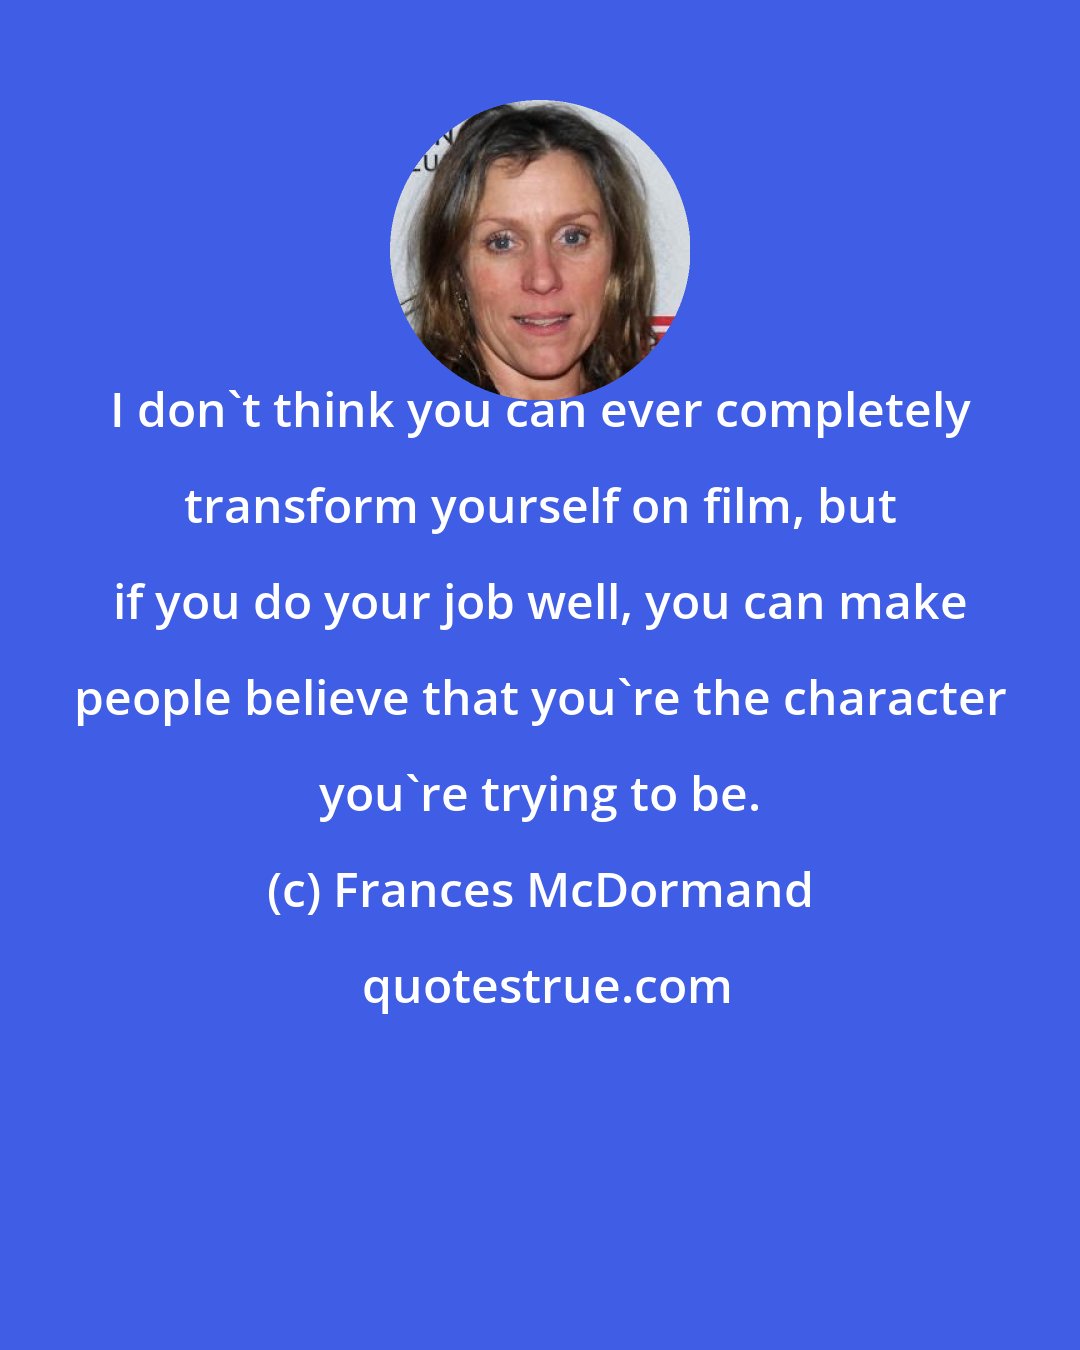 Frances McDormand: I don't think you can ever completely transform yourself on film, but if you do your job well, you can make people believe that you're the character you're trying to be.